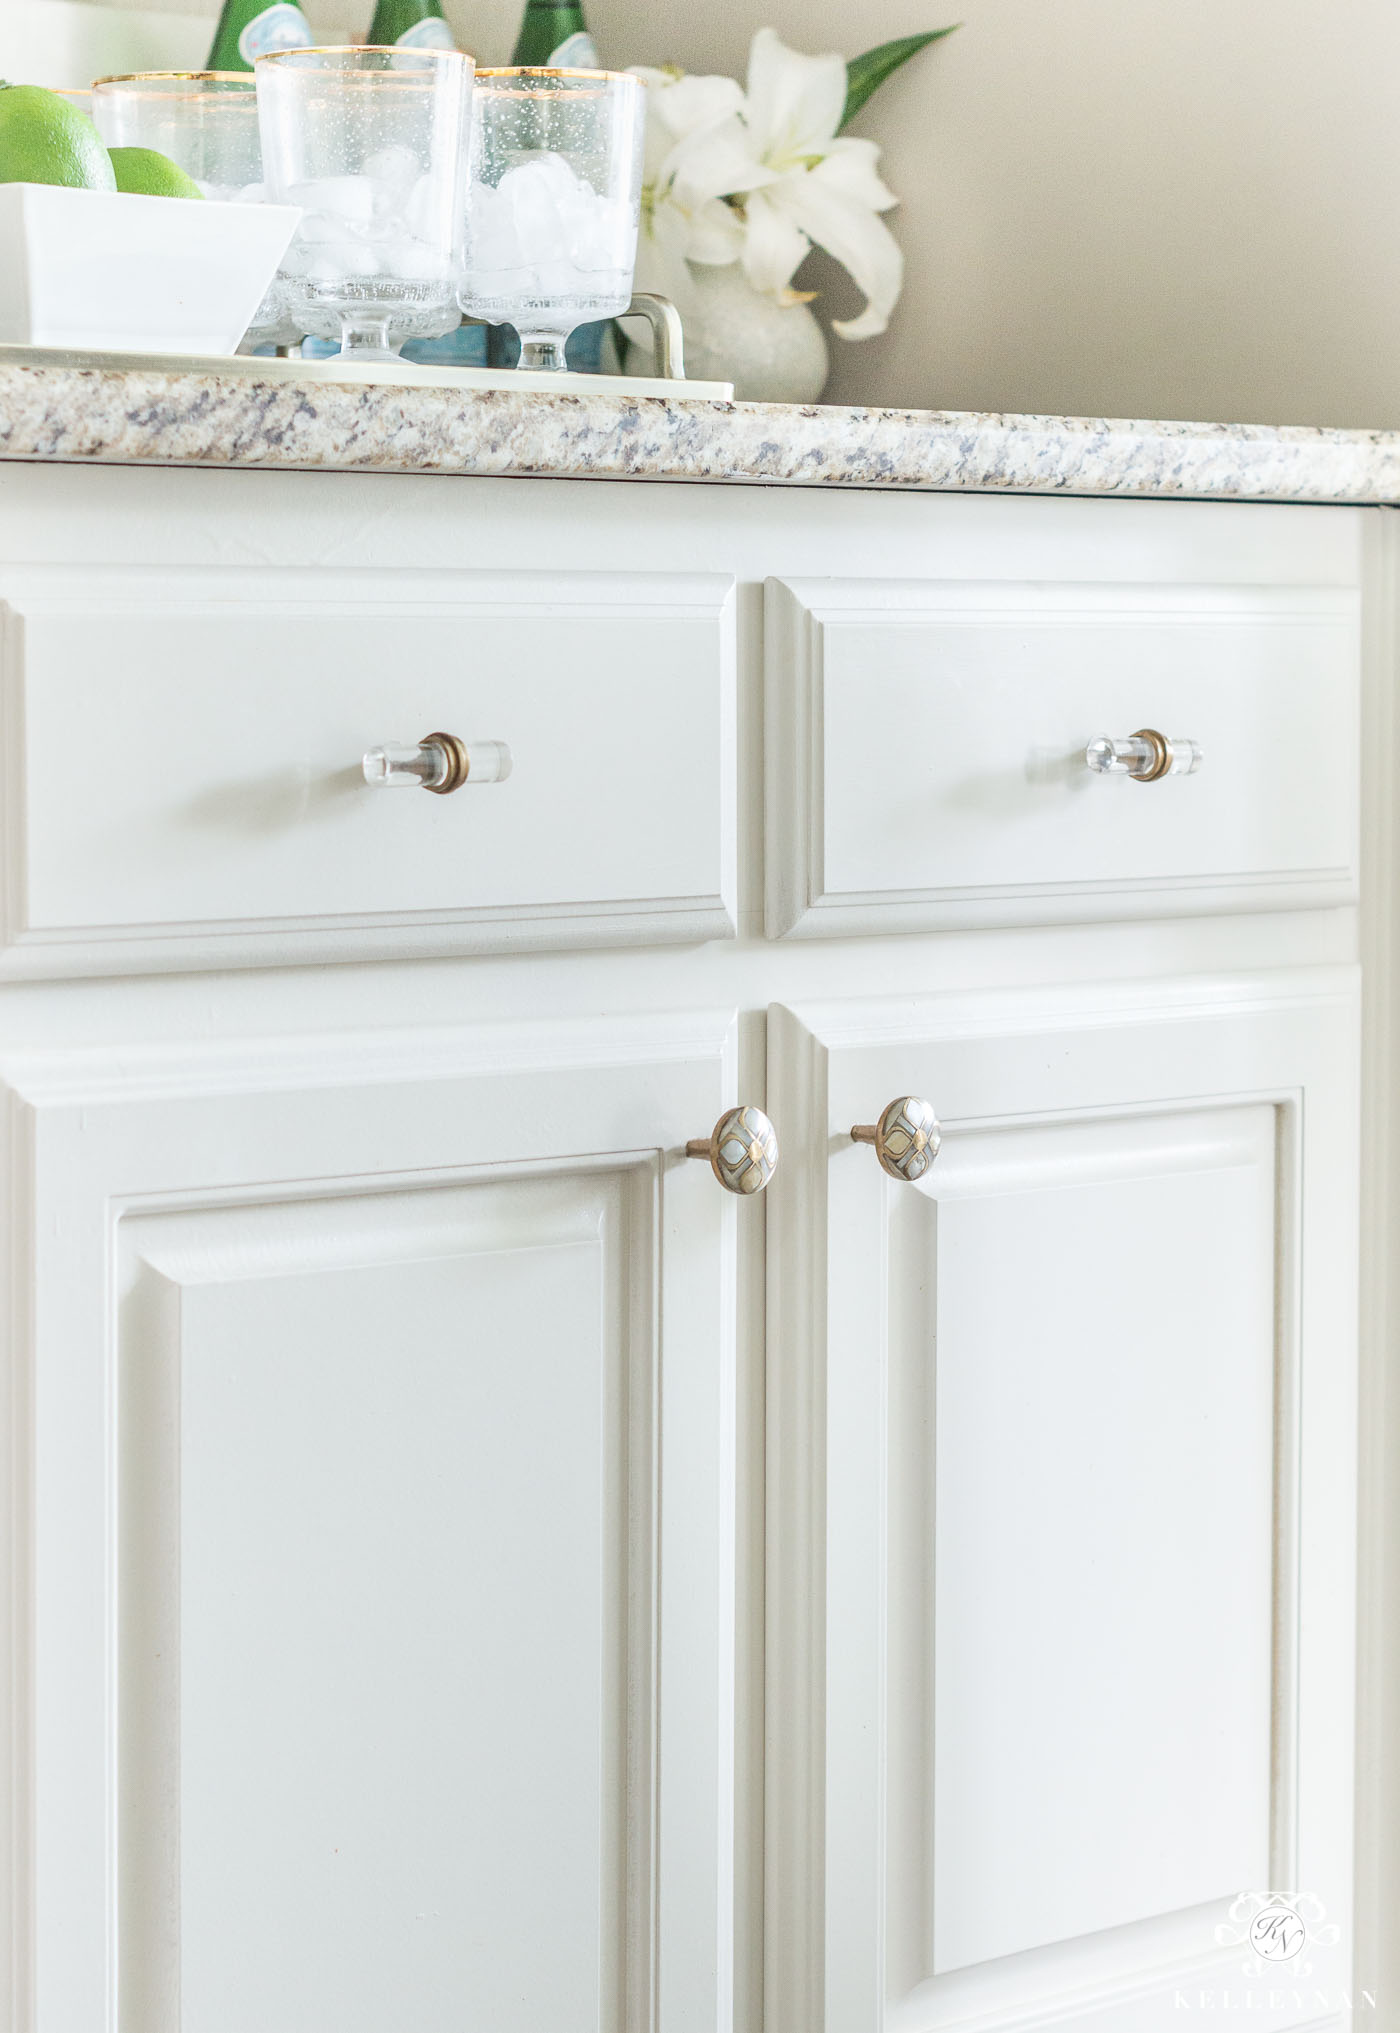 Mixing and matching knobs and pulls in brass kitchen hardware